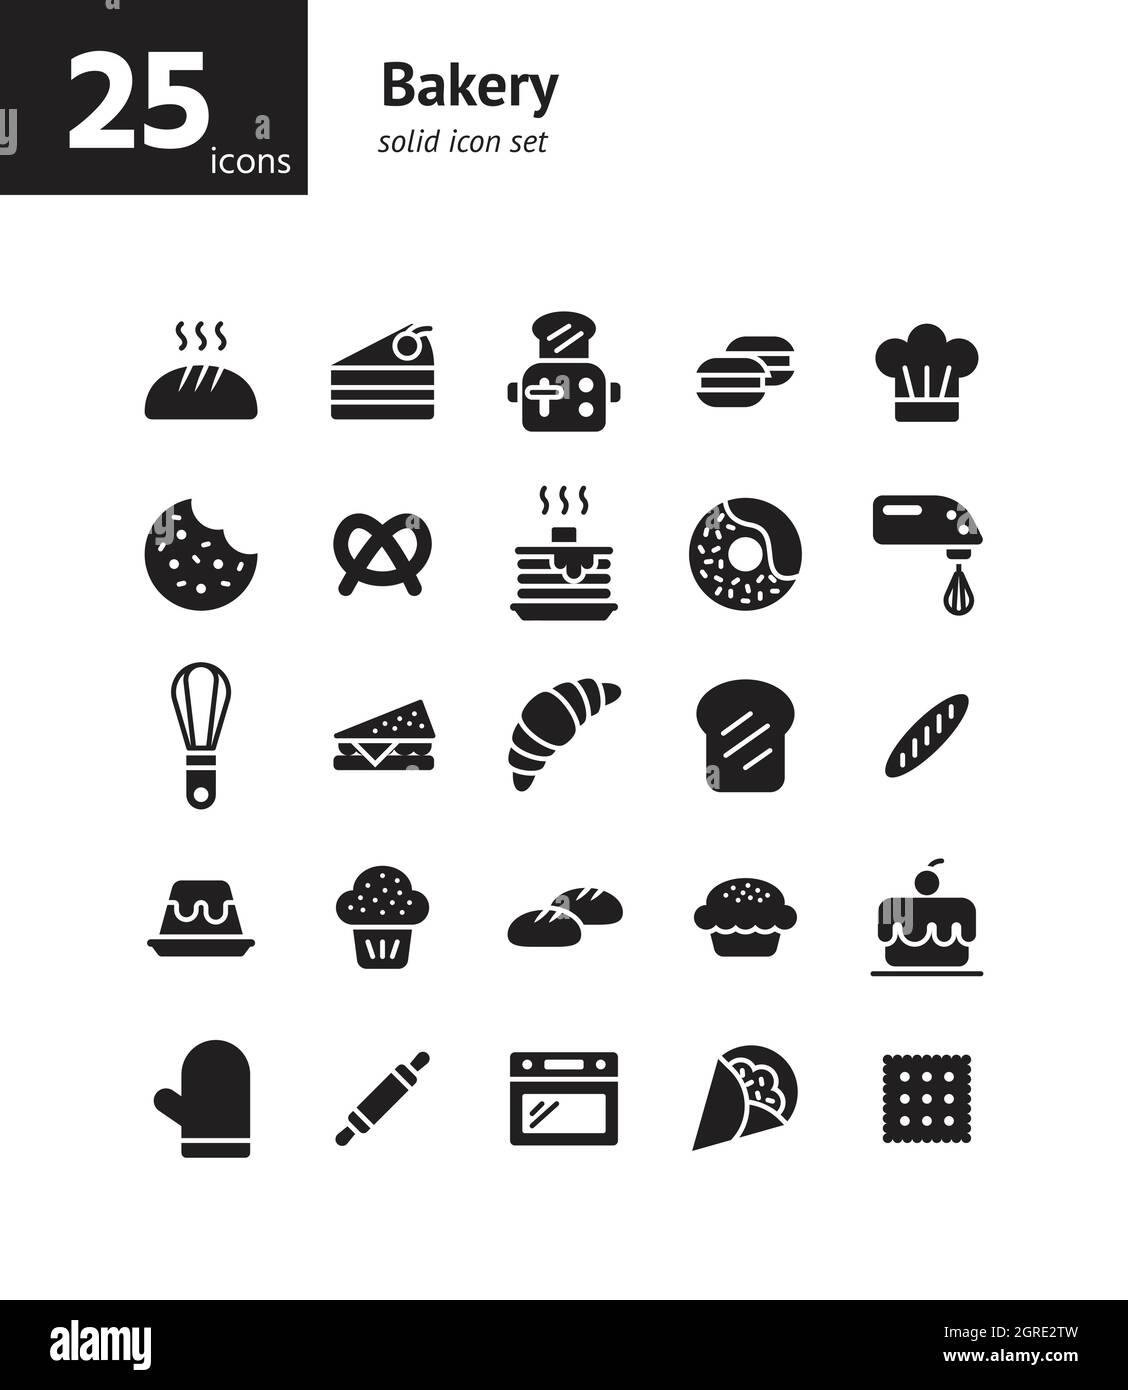 Bakery solid icon set. Vector and Illustration. Stock Vector